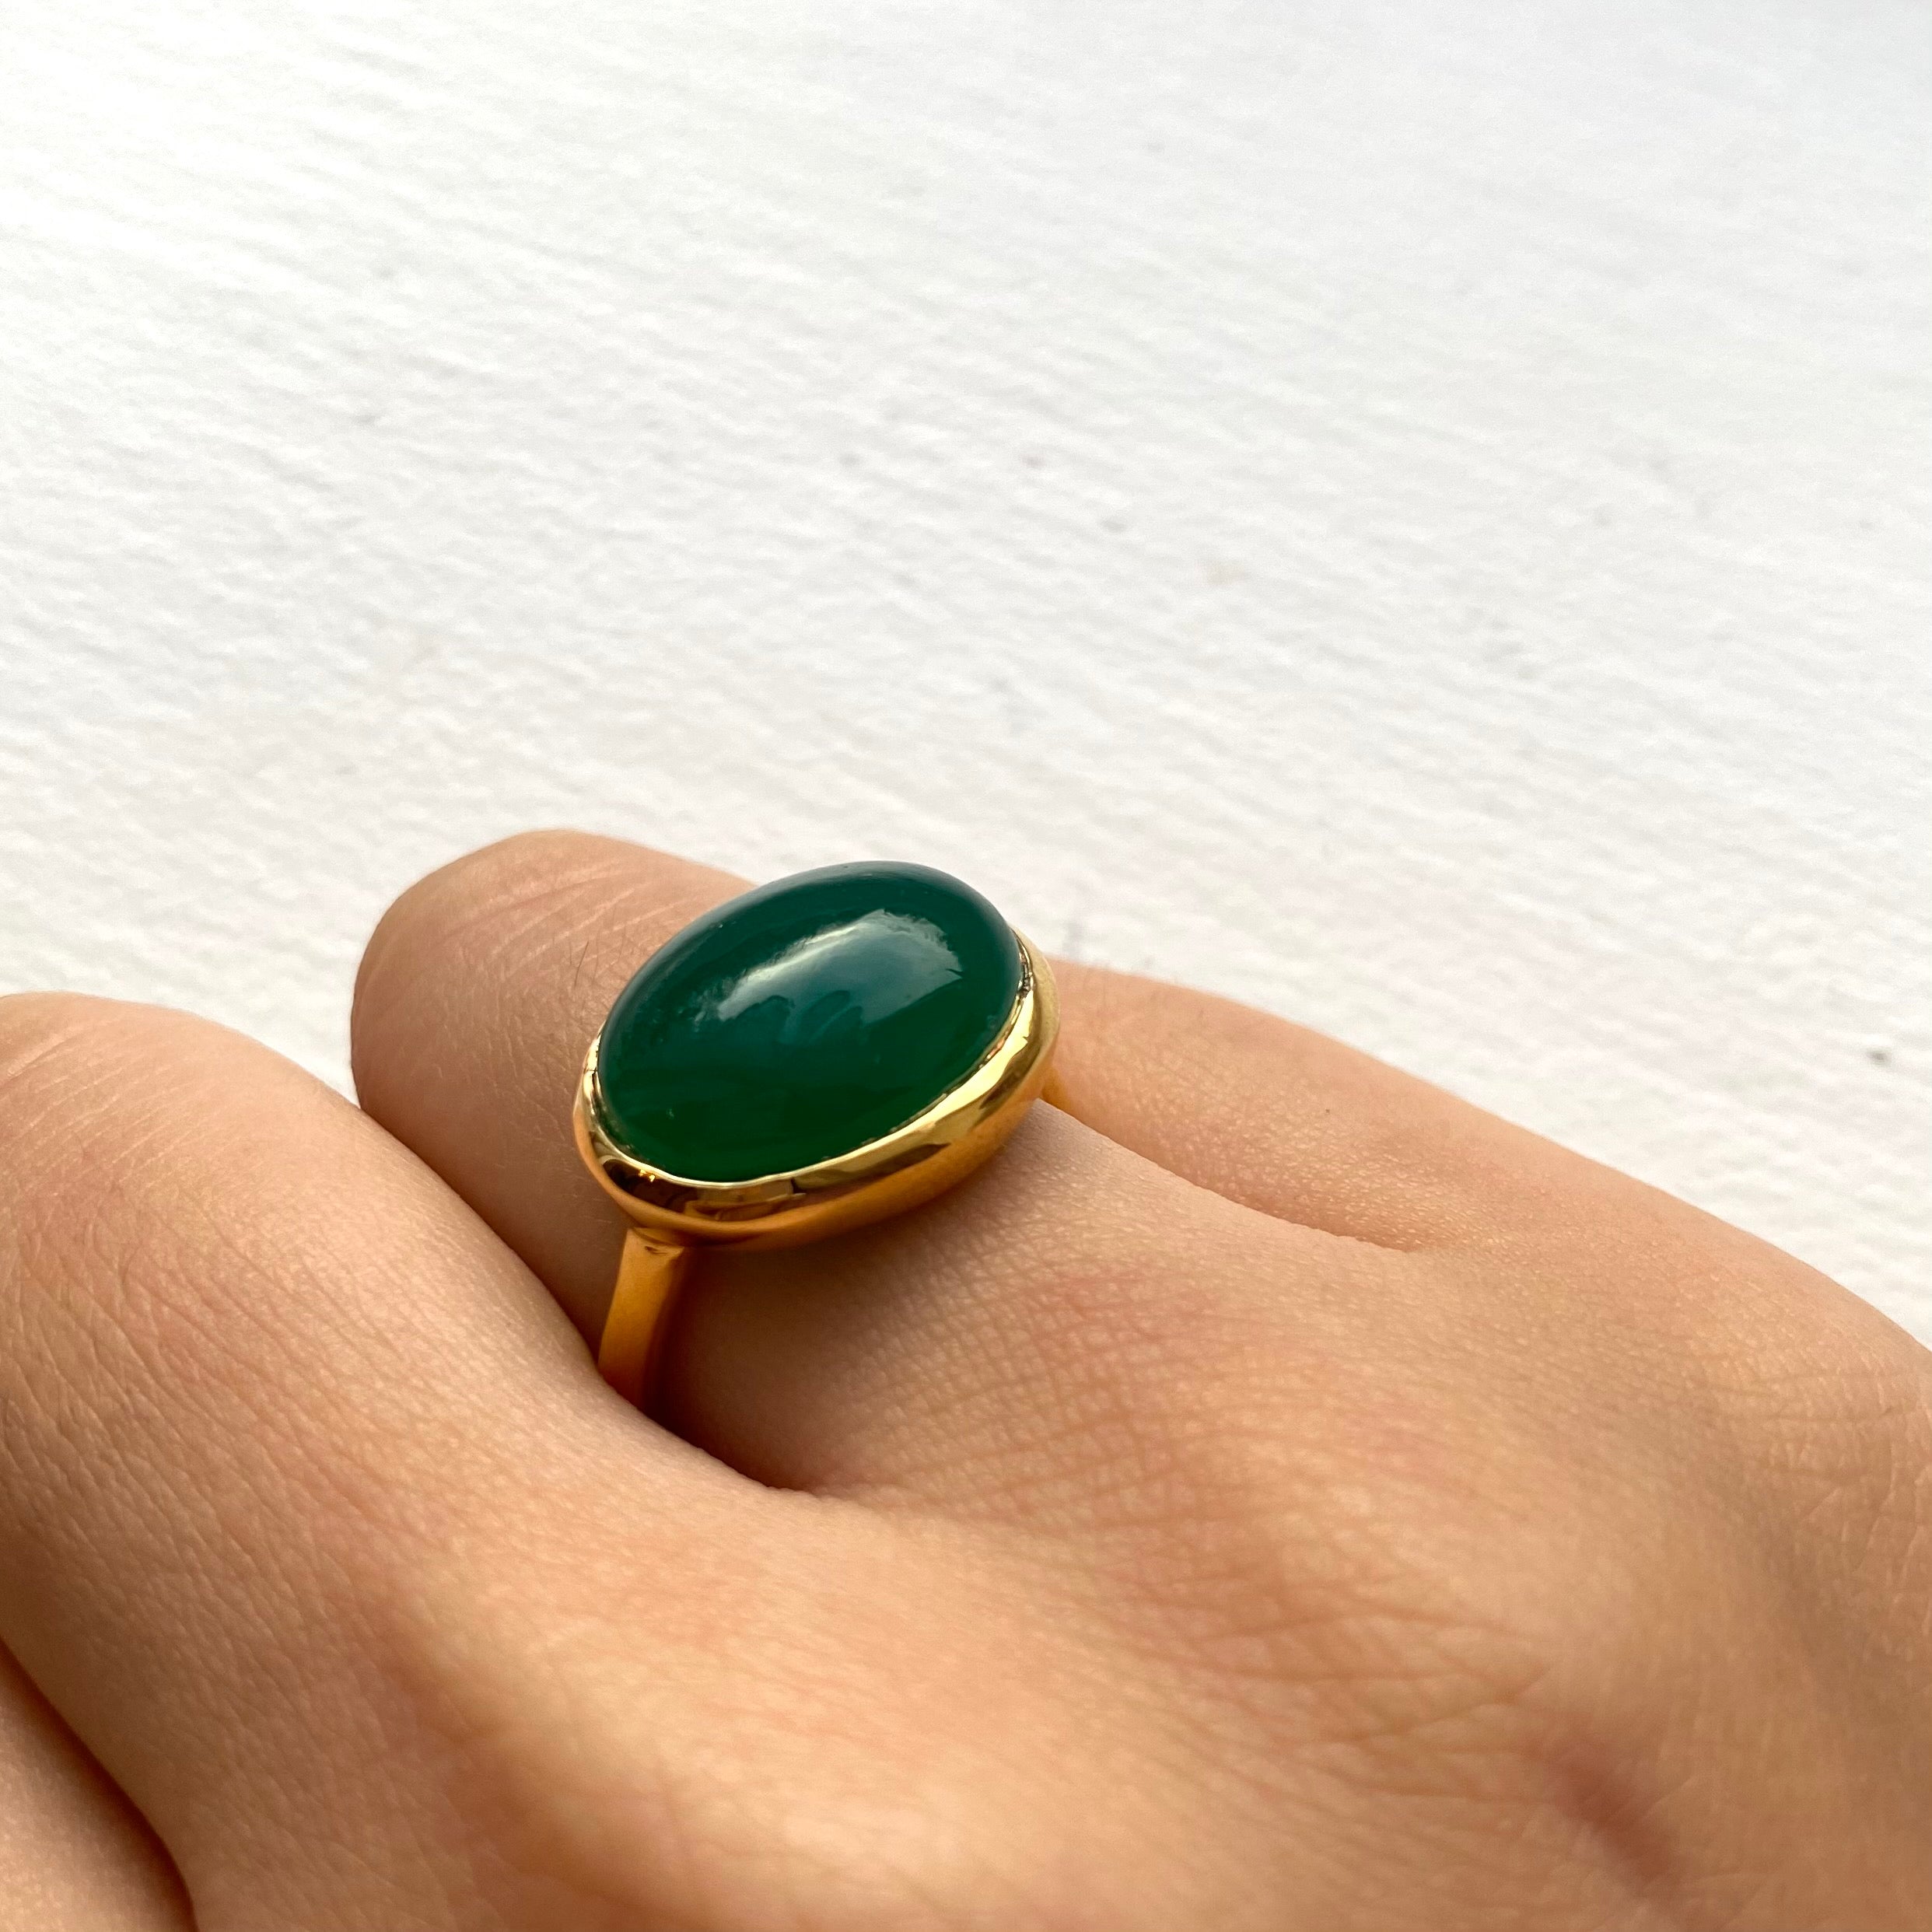 Cabochon Oval Cut Natural Gemstone Gold Plated Sterling Silver Ring - Green Onyx